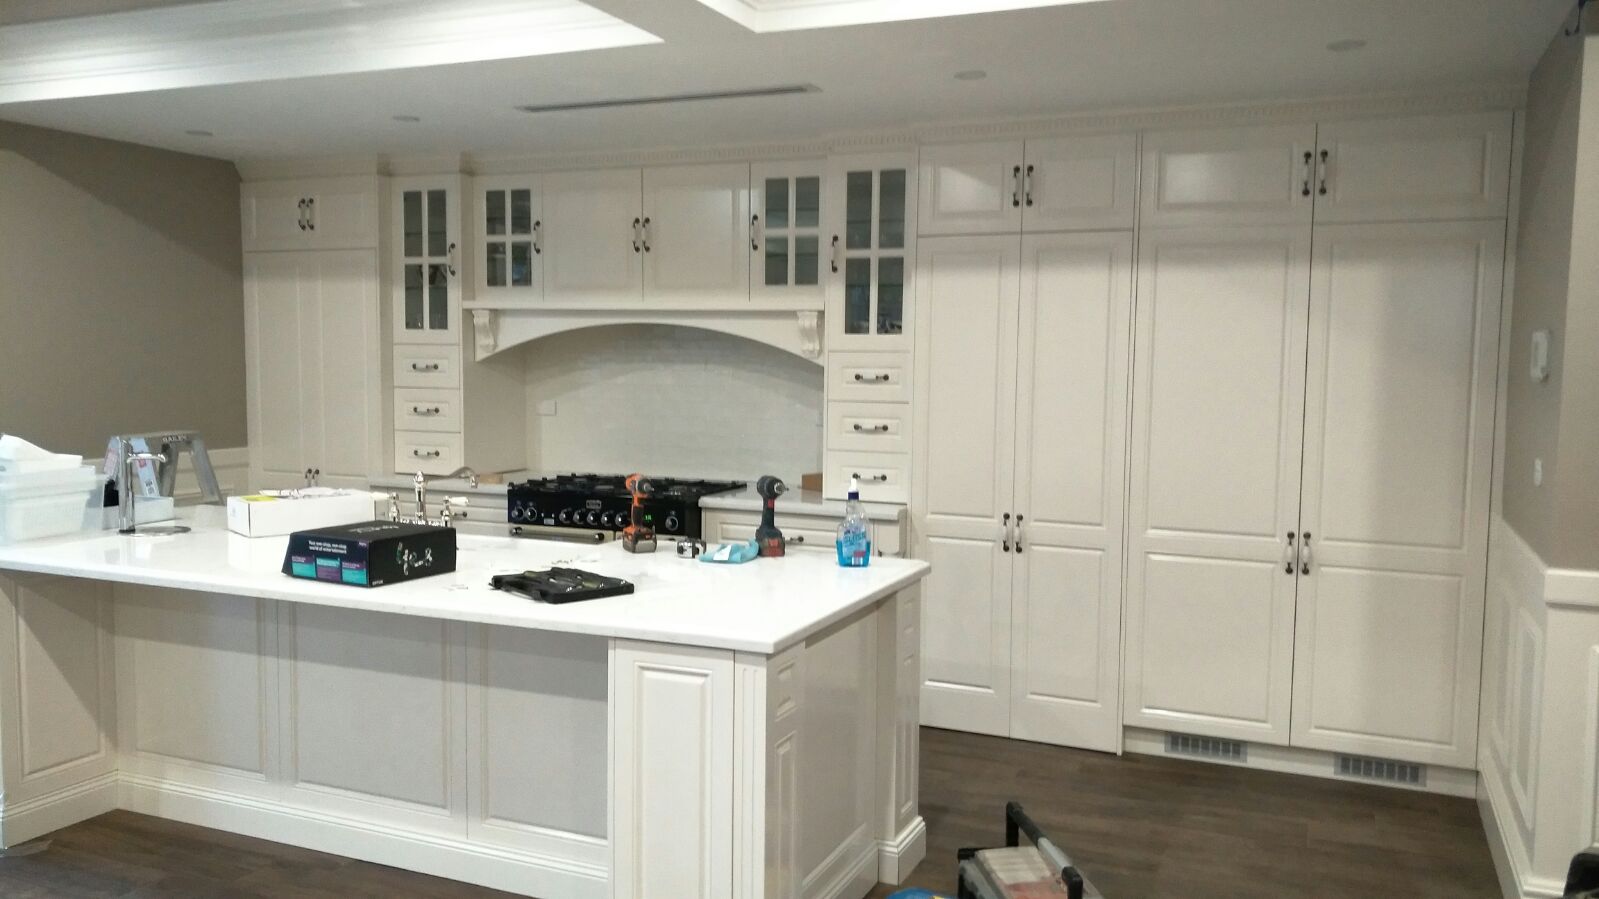 traditional kitchen